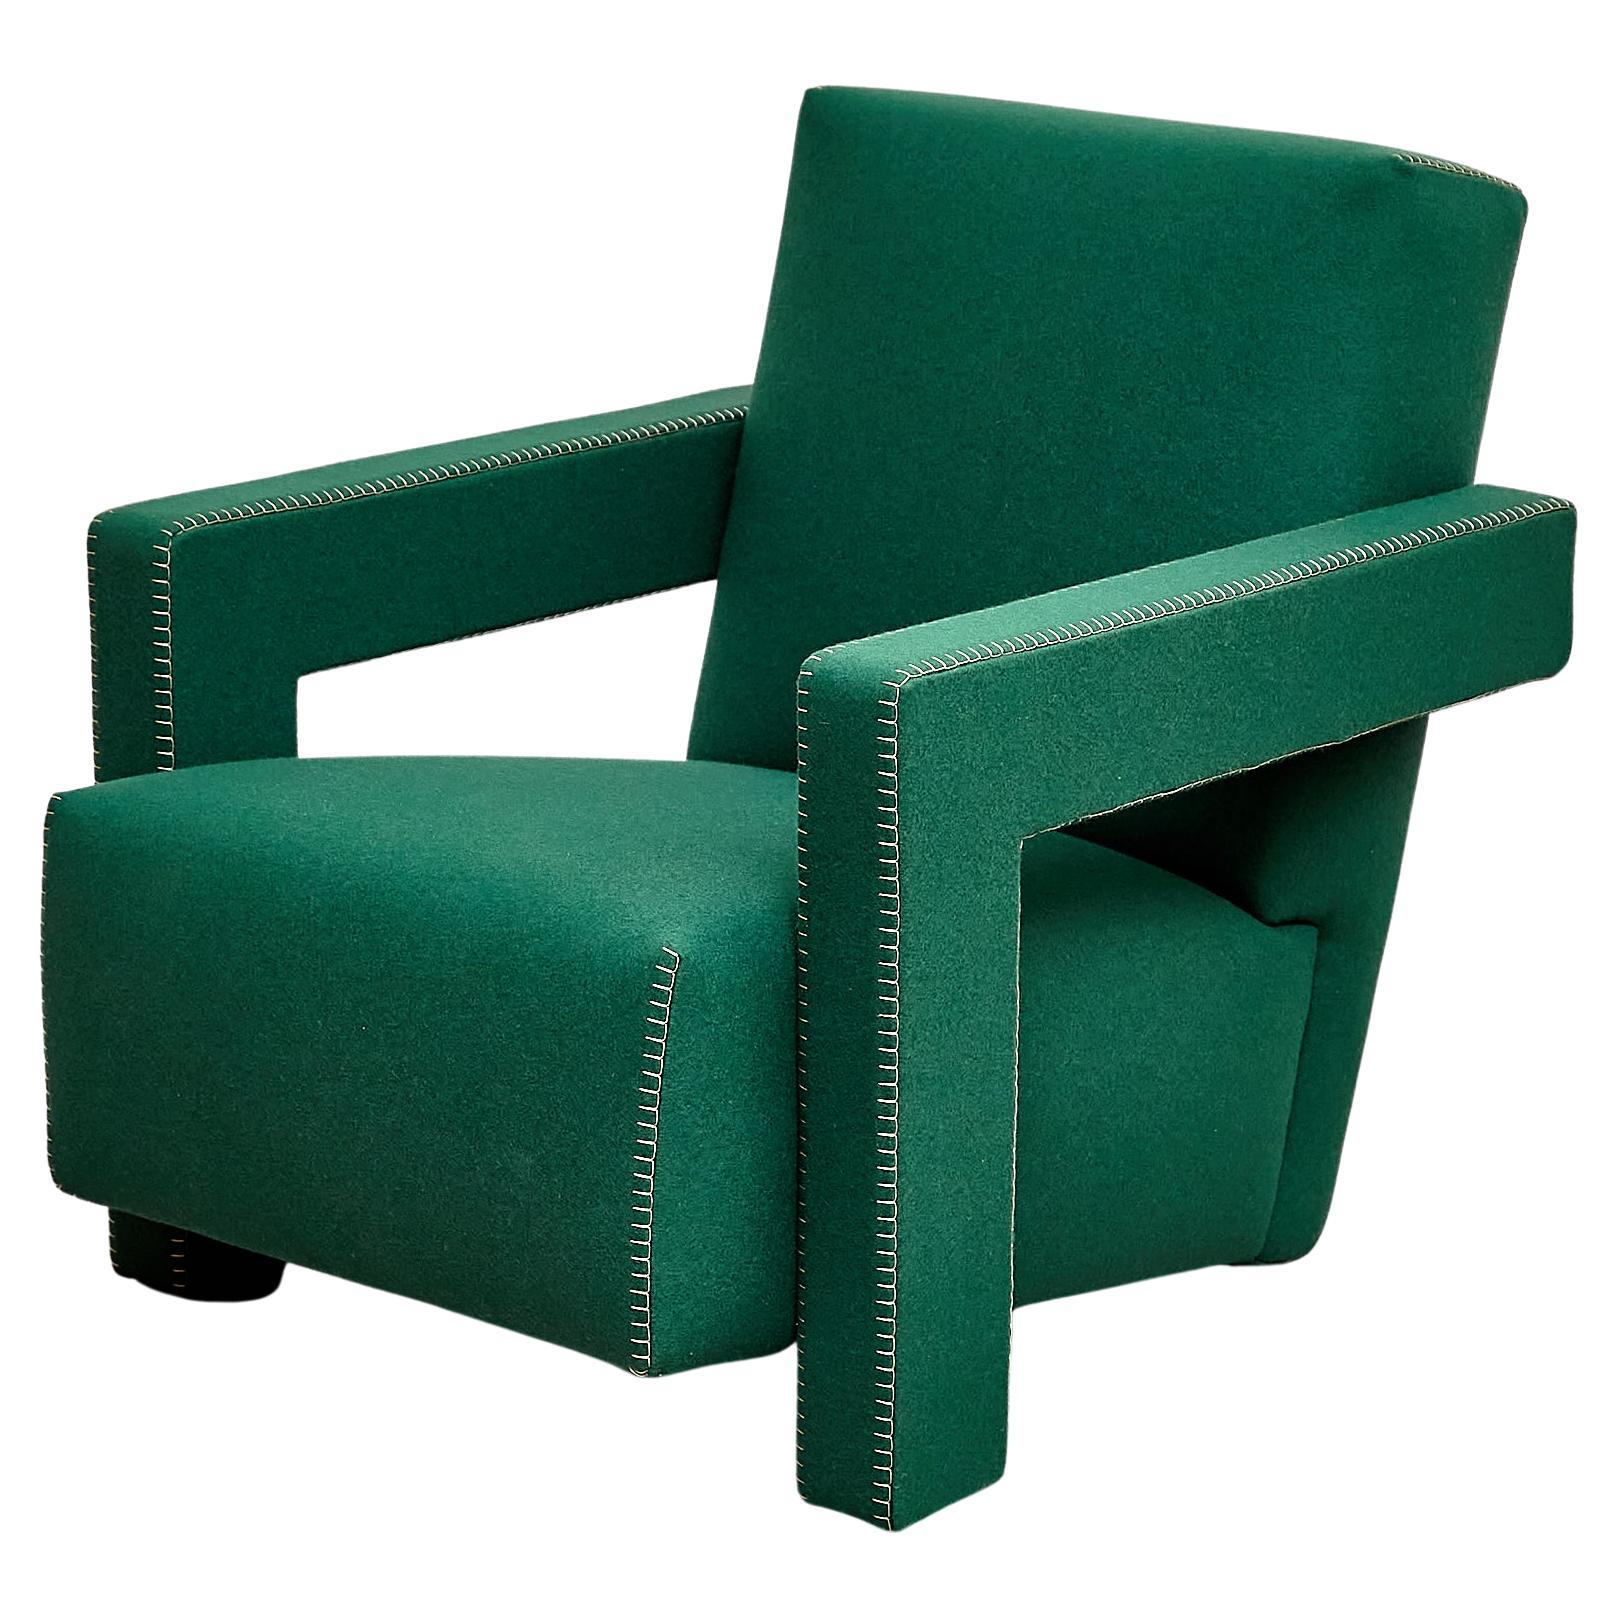 Armchair designed by Gerrit Thomas Rietveld in 1935. Relaunched in 2015.

Manufactured by Cassina in Italy.

Materials:
Fabric
 
Dimensions:
D 85 cm x W 64 cm x H 60 cm (SH 37 cm)

Gerrit T. Rietveld came up with the design for the Utrecht armchair